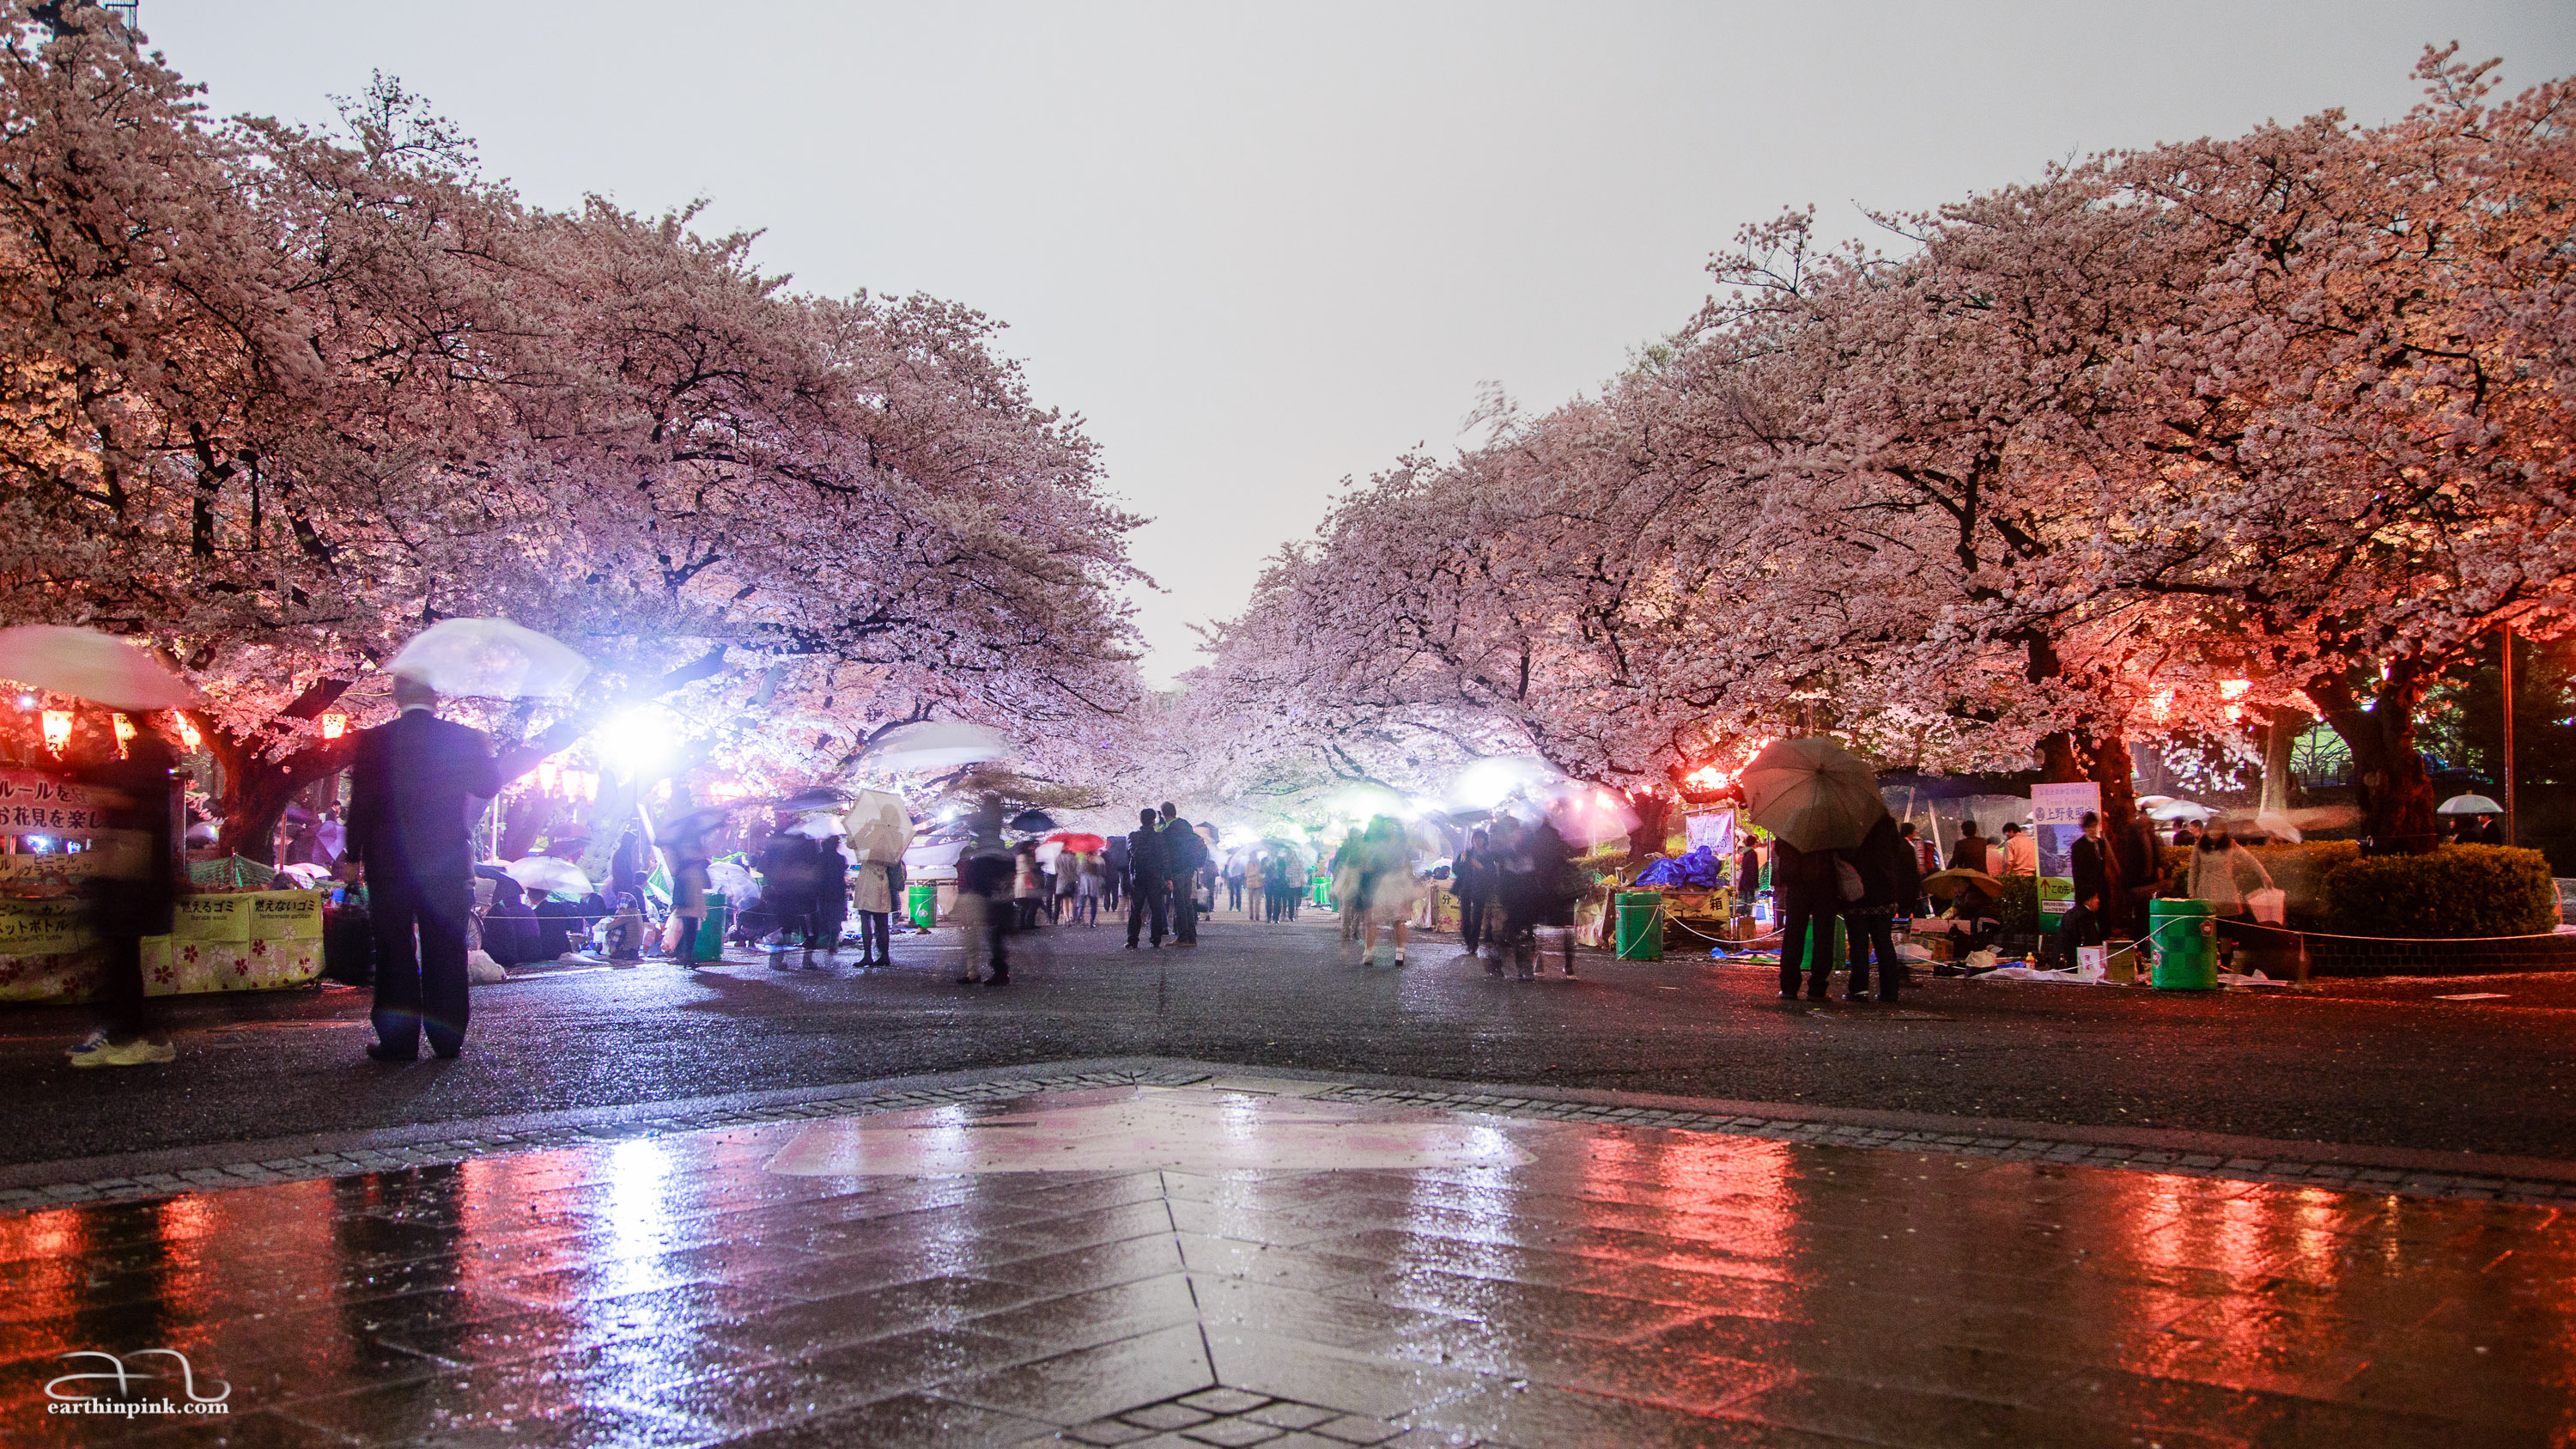 A rainy evening in Ueno park, just after sunset